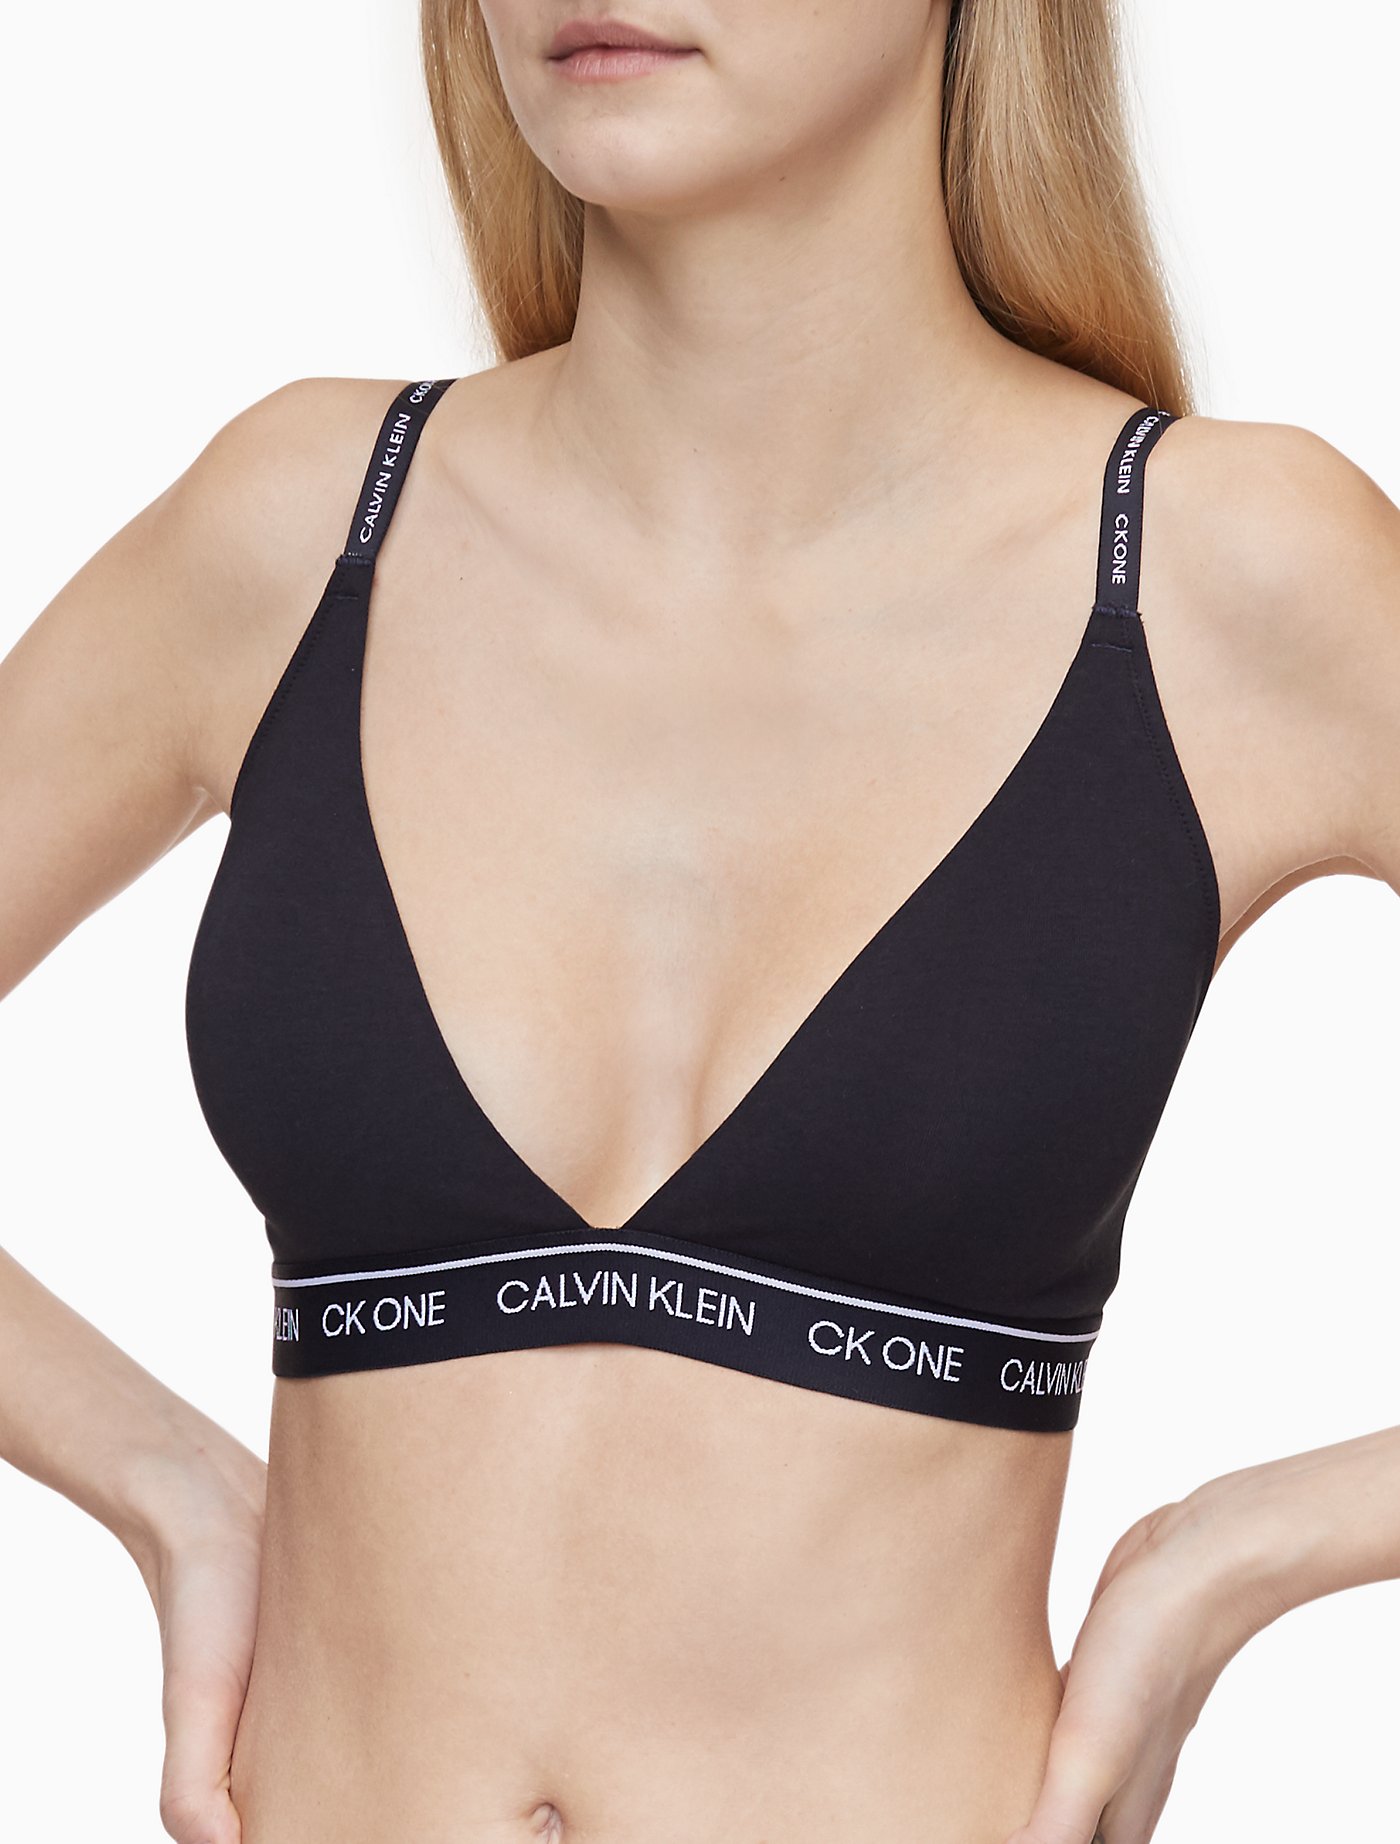 CK ONE Lightly Lined Triangle Bralette | Calvin Klein